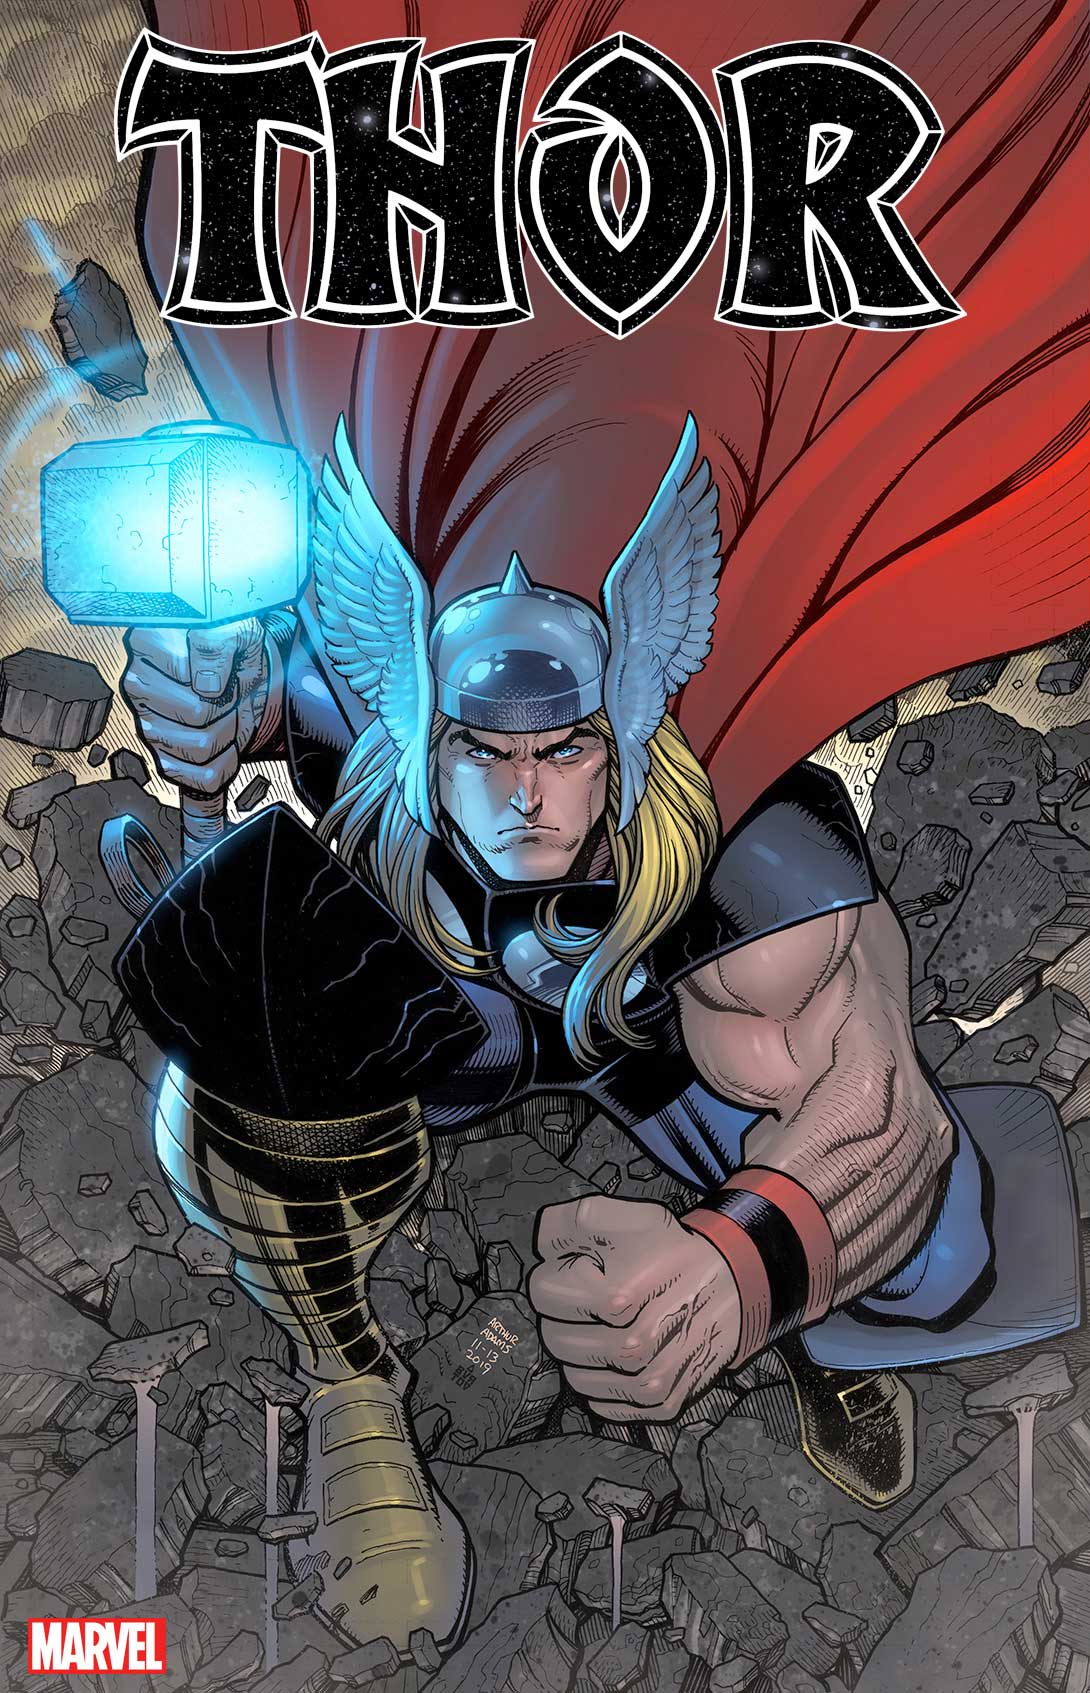 Marvel shares another Thor #1 variant cover — Major Spoilers — Comic